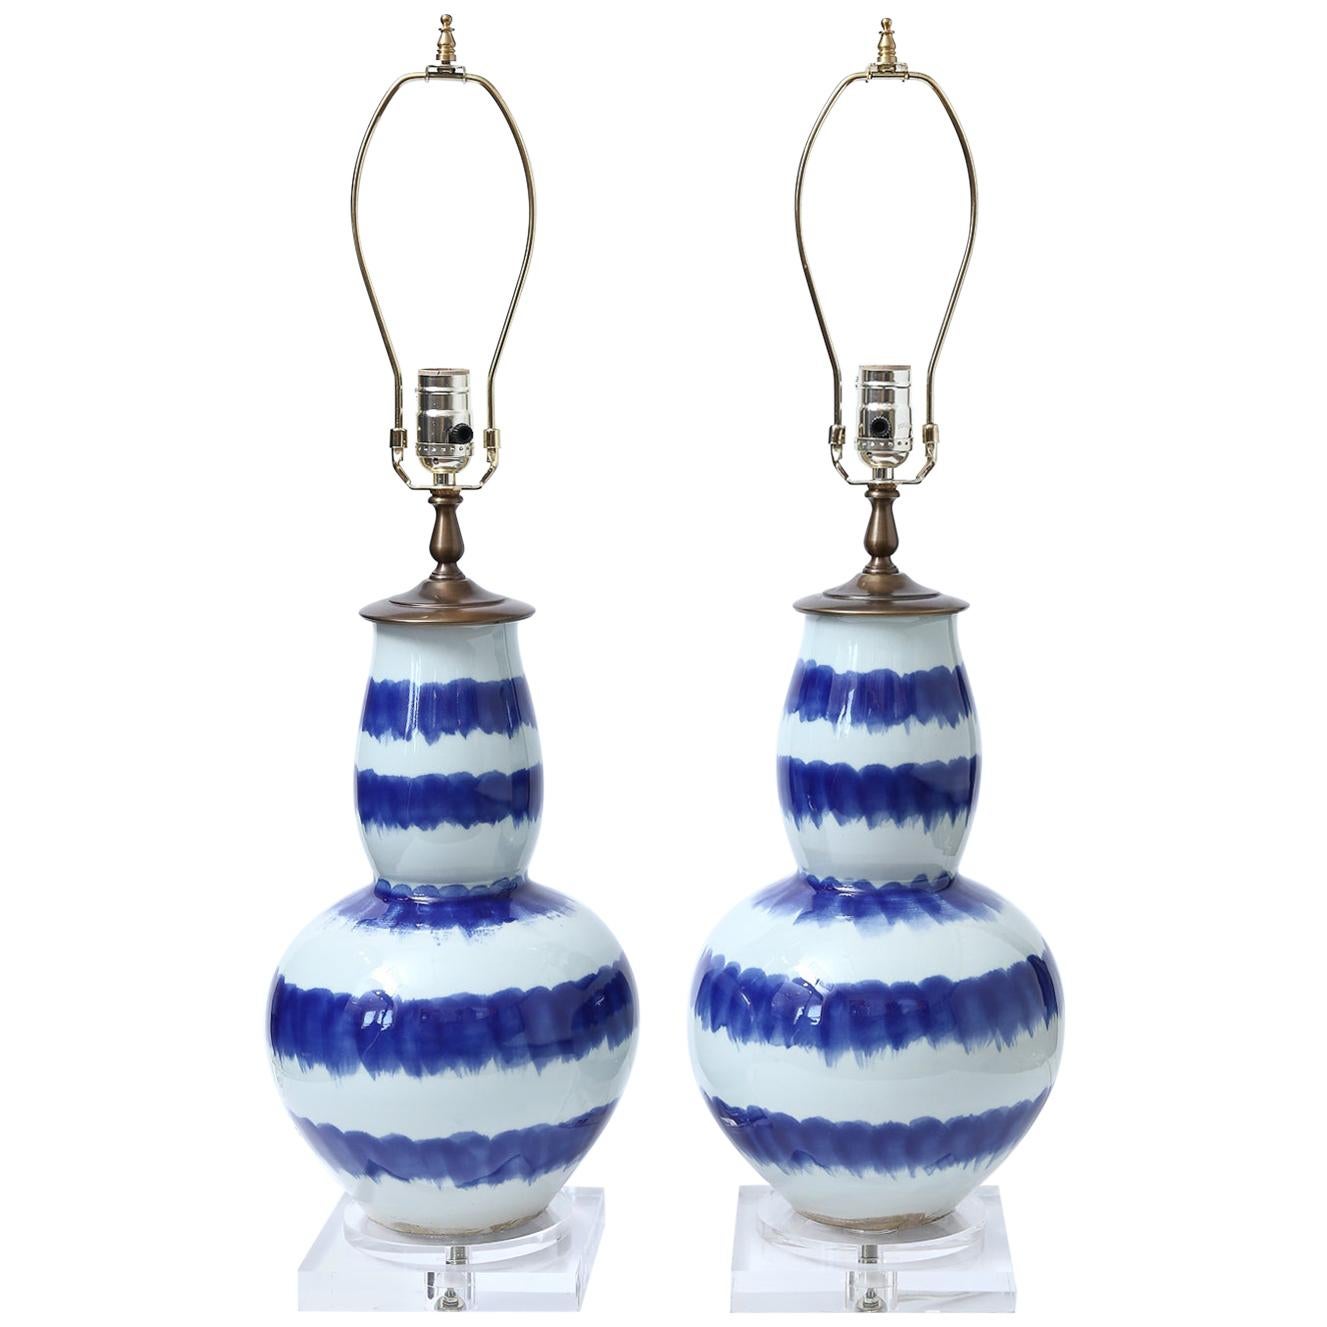 Pair of Blue and Celadon Striped Ceramic Table Lamps